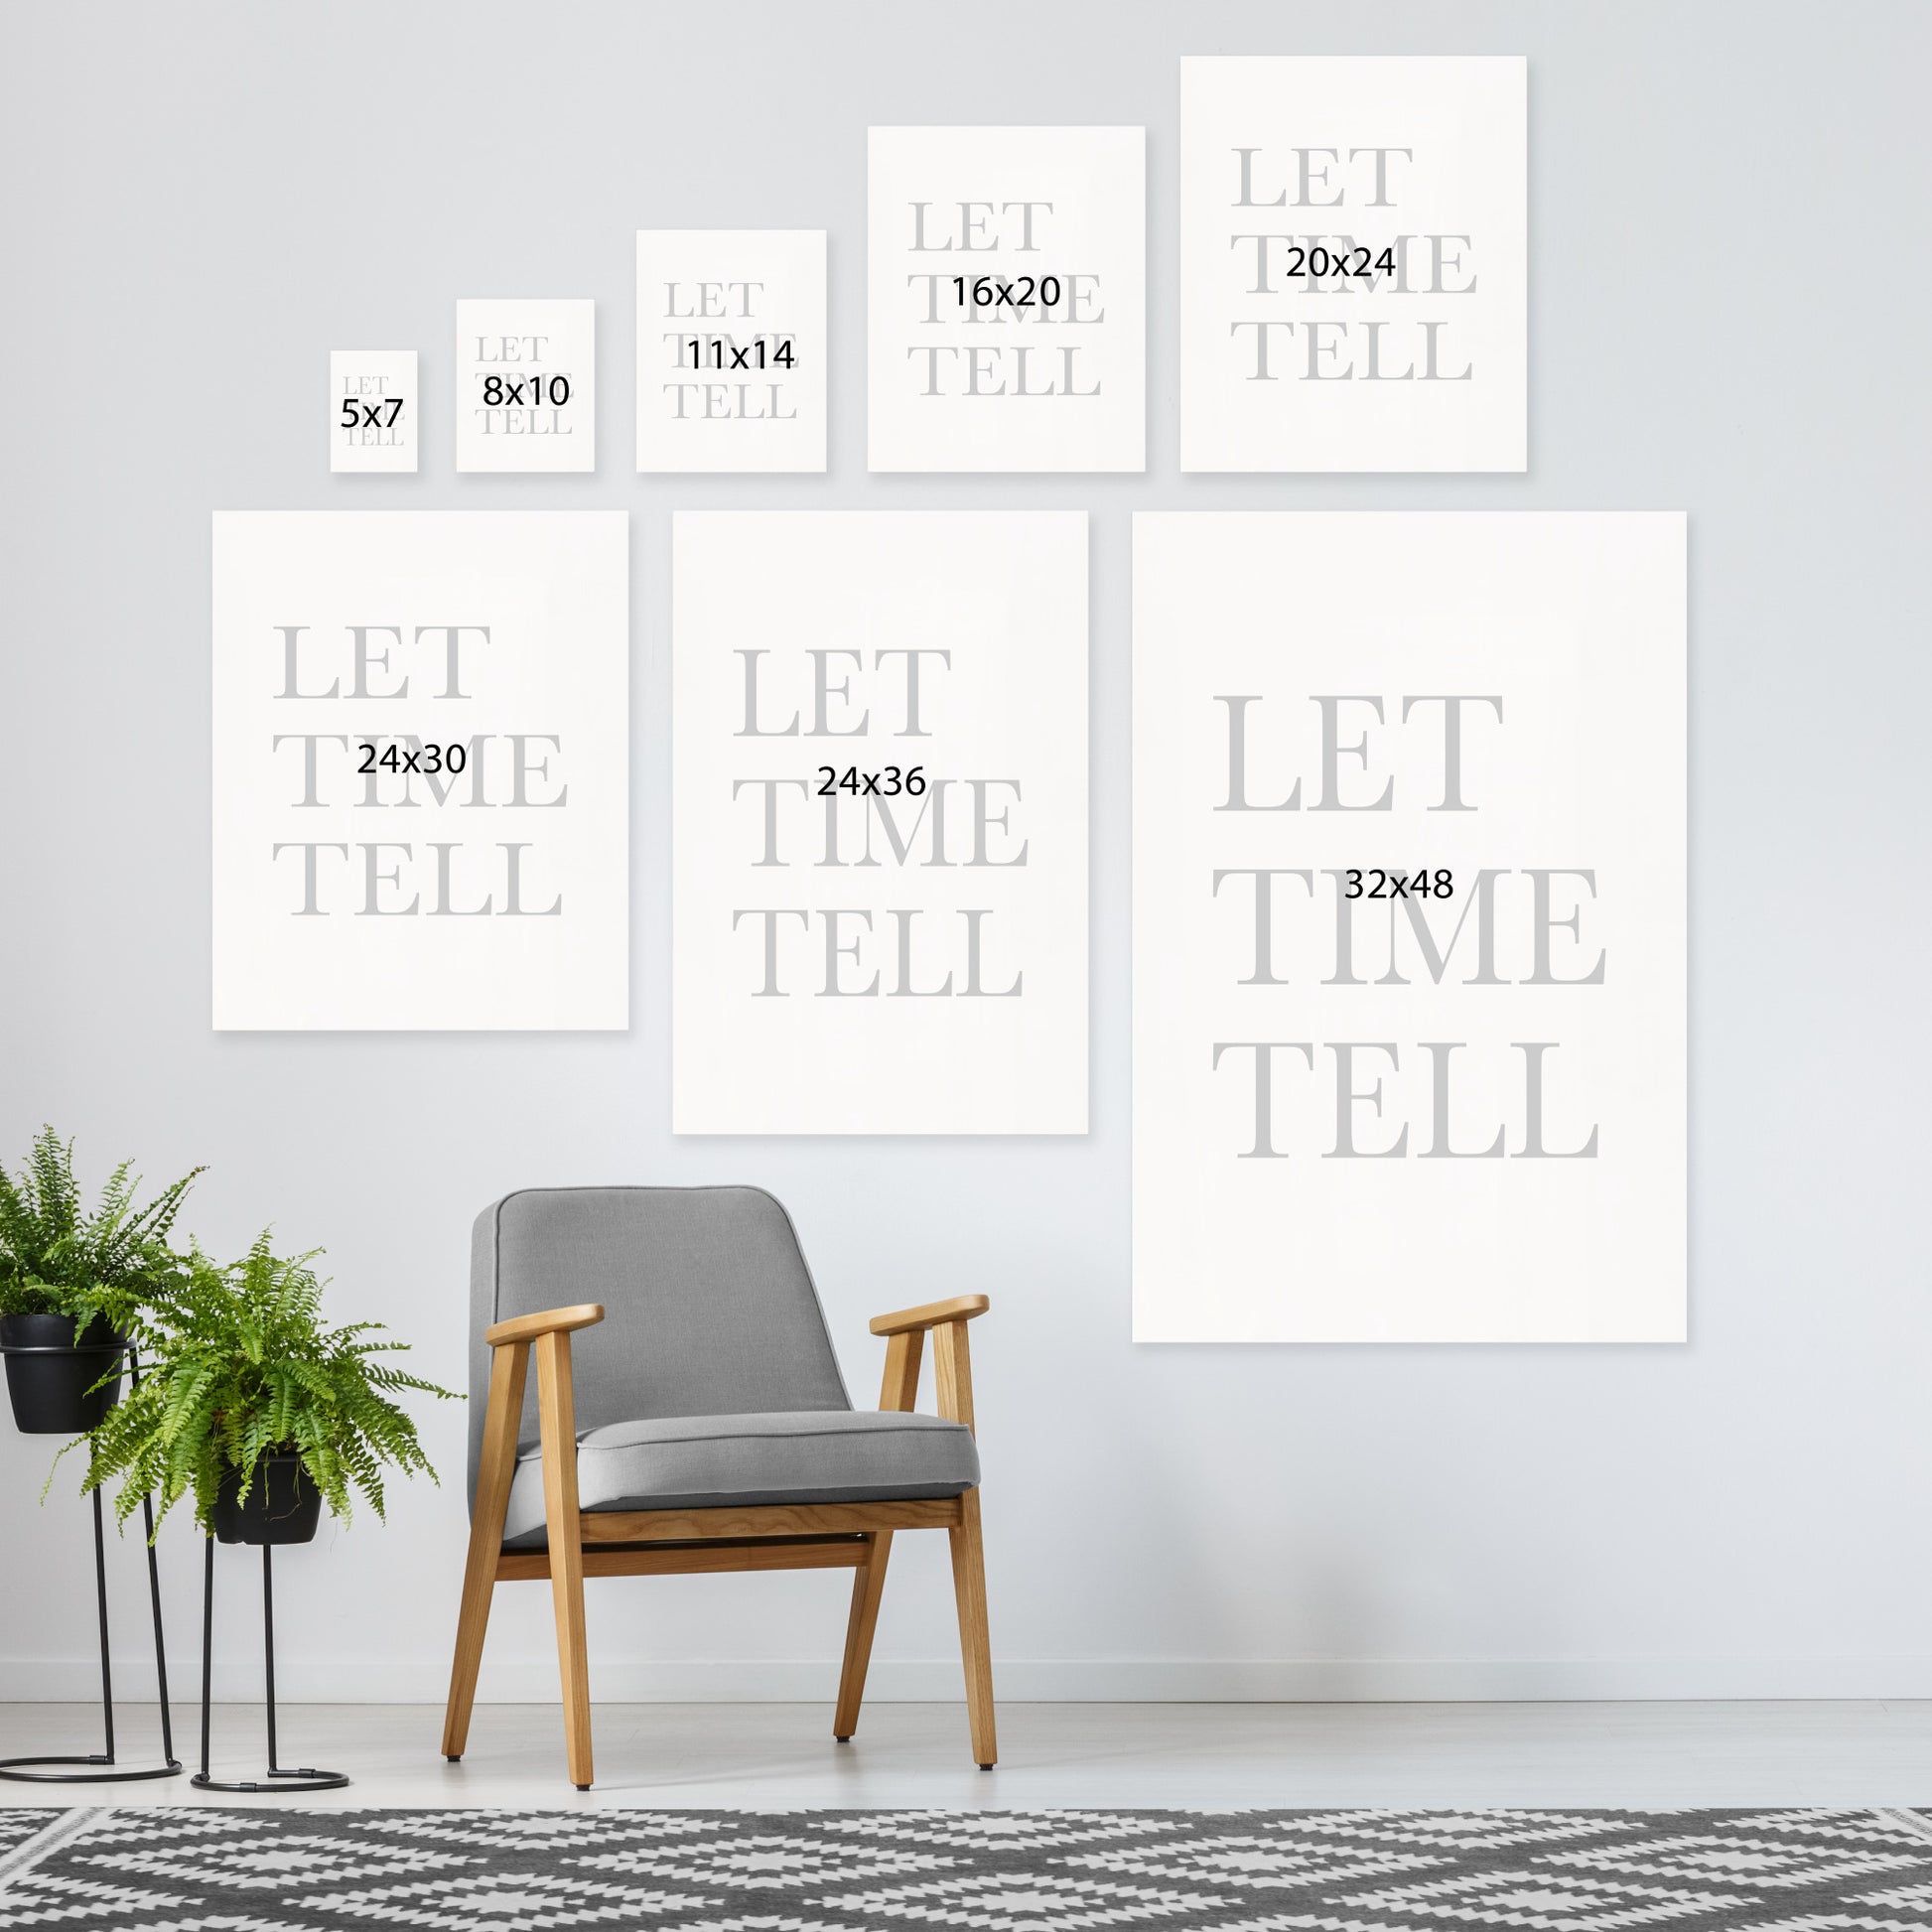 Let Time Tell Black by The Print Republic - Canvas, Poster or Framed Print